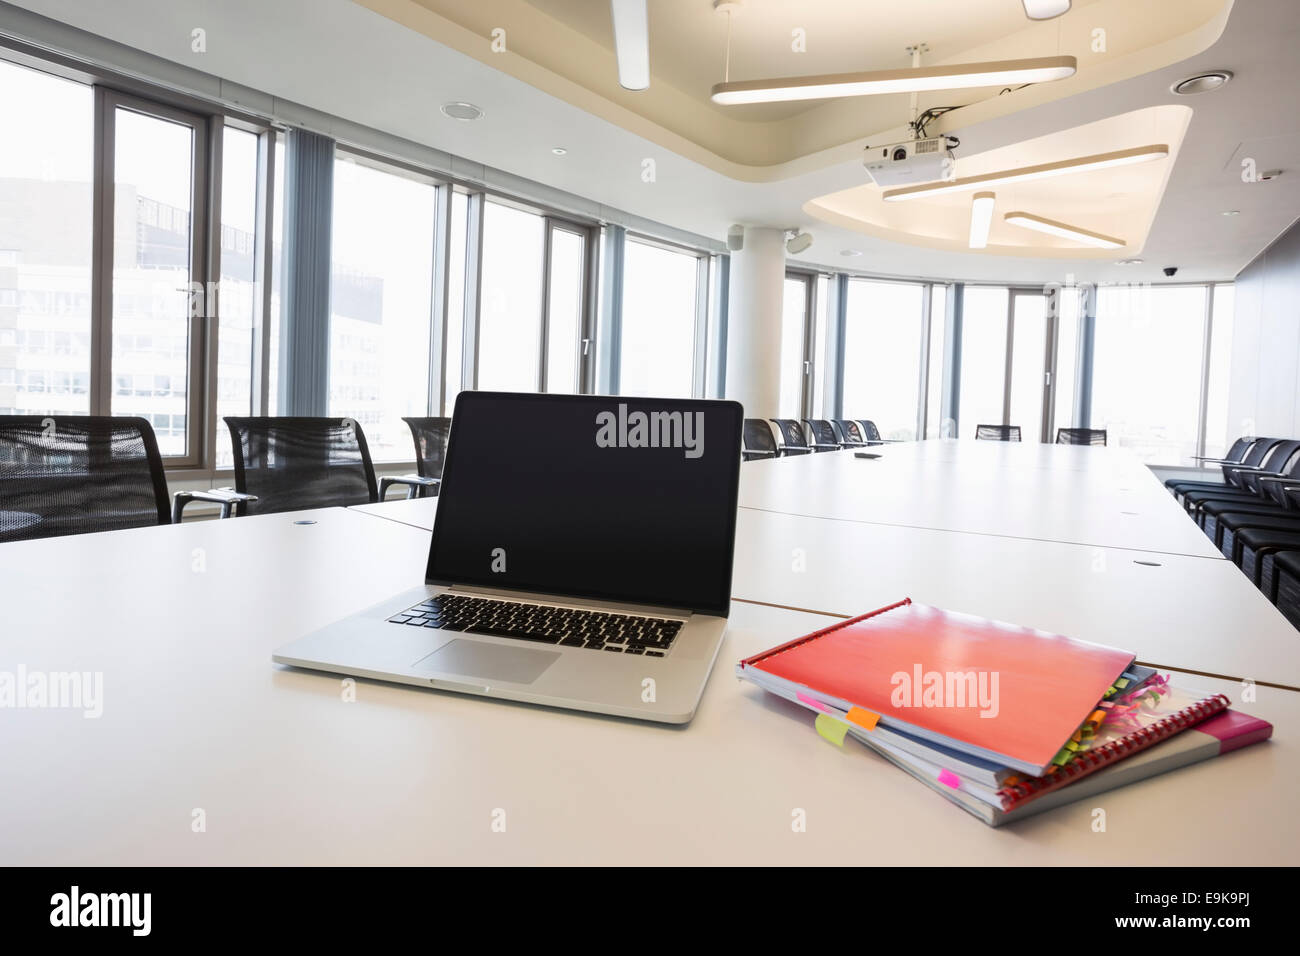 Laptop and files on empty conference table in creative office Stock Photo